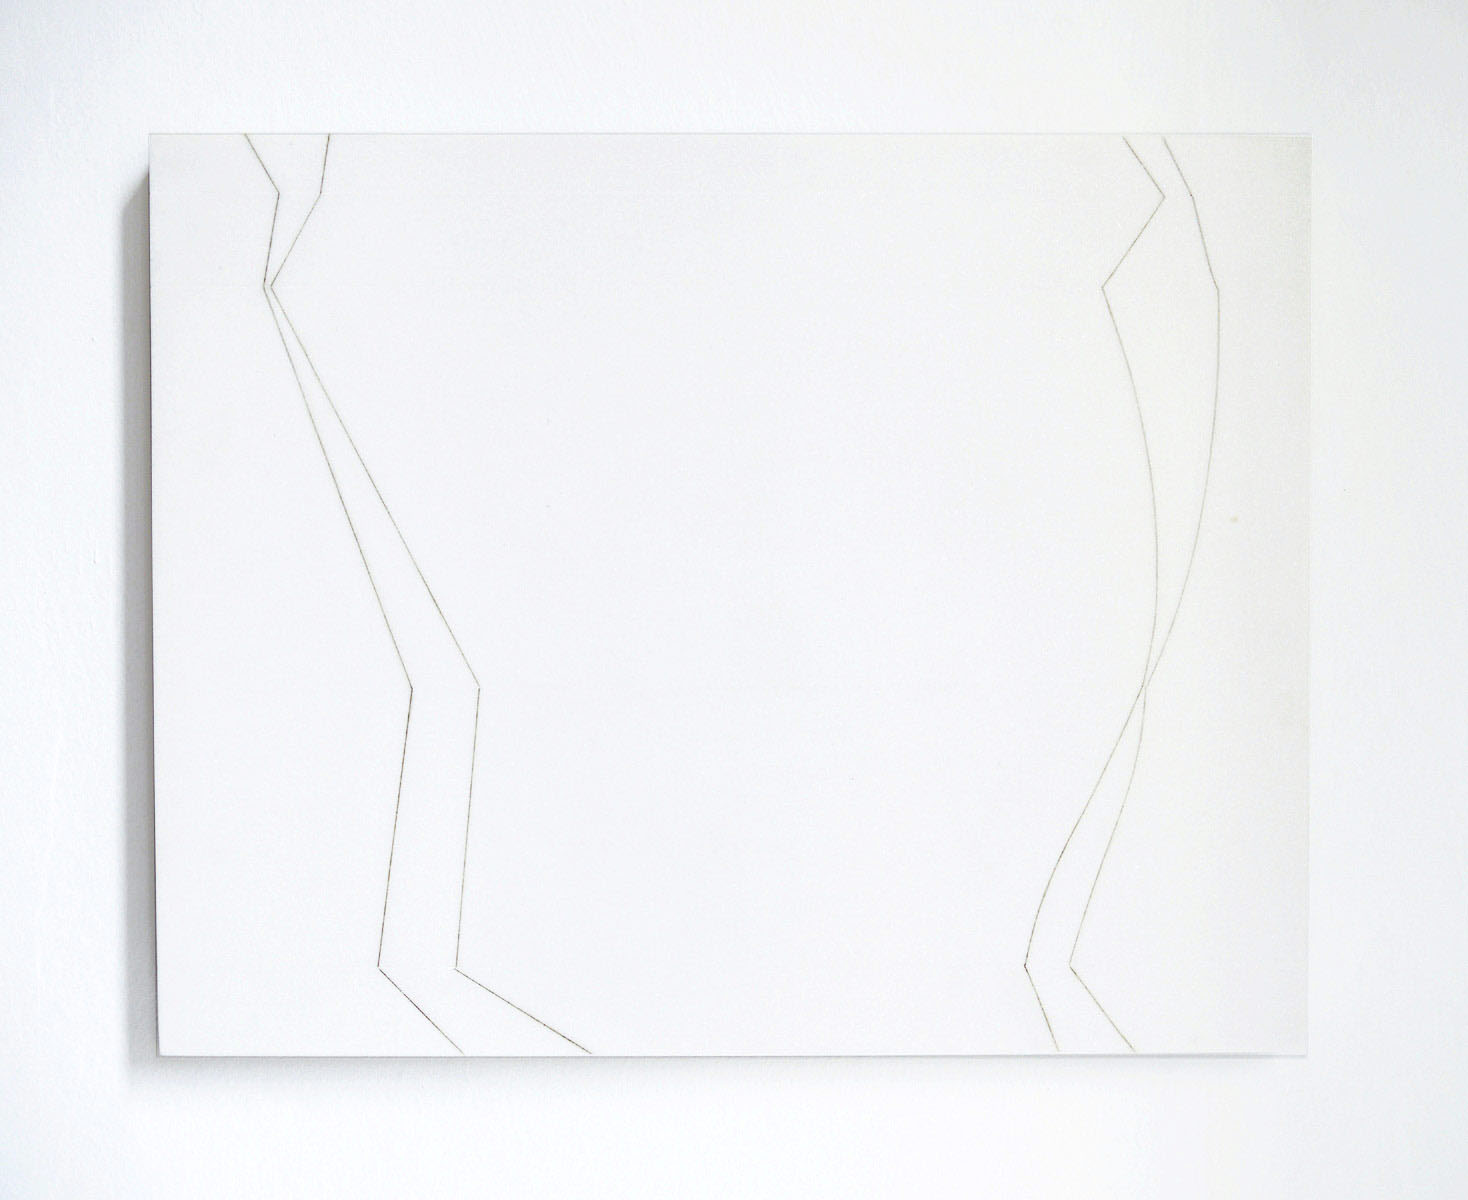 Antonio Catelani - canone variabile 1989 silverpoint drowing on withe marble slab cm 40x50x2